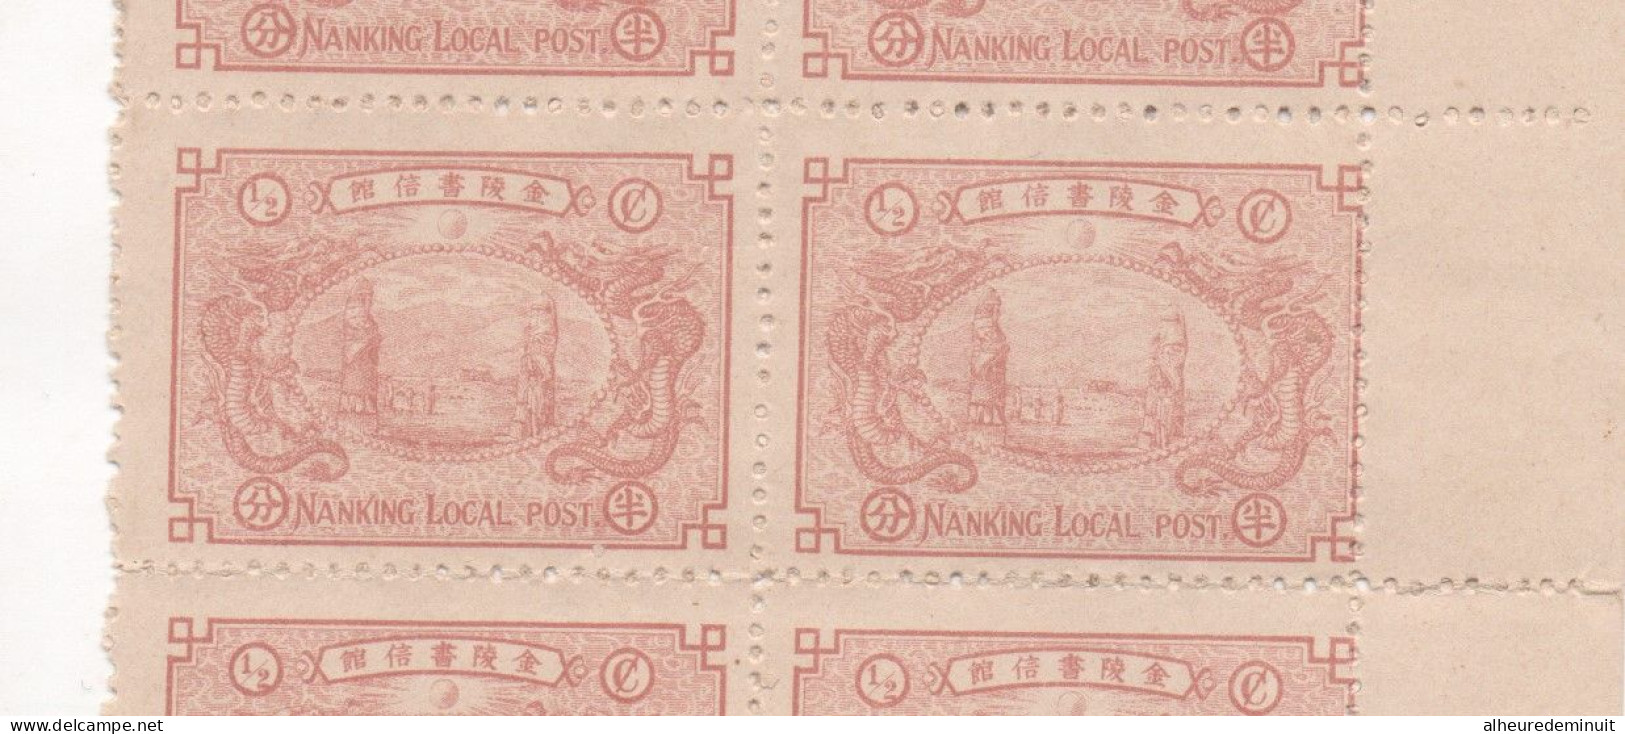 Lot Bande 10 Timbres Non Oblitérés"1896"NANKING LOCAL POST" LOCAL POST 1/2c"china"chine" - Ungebraucht